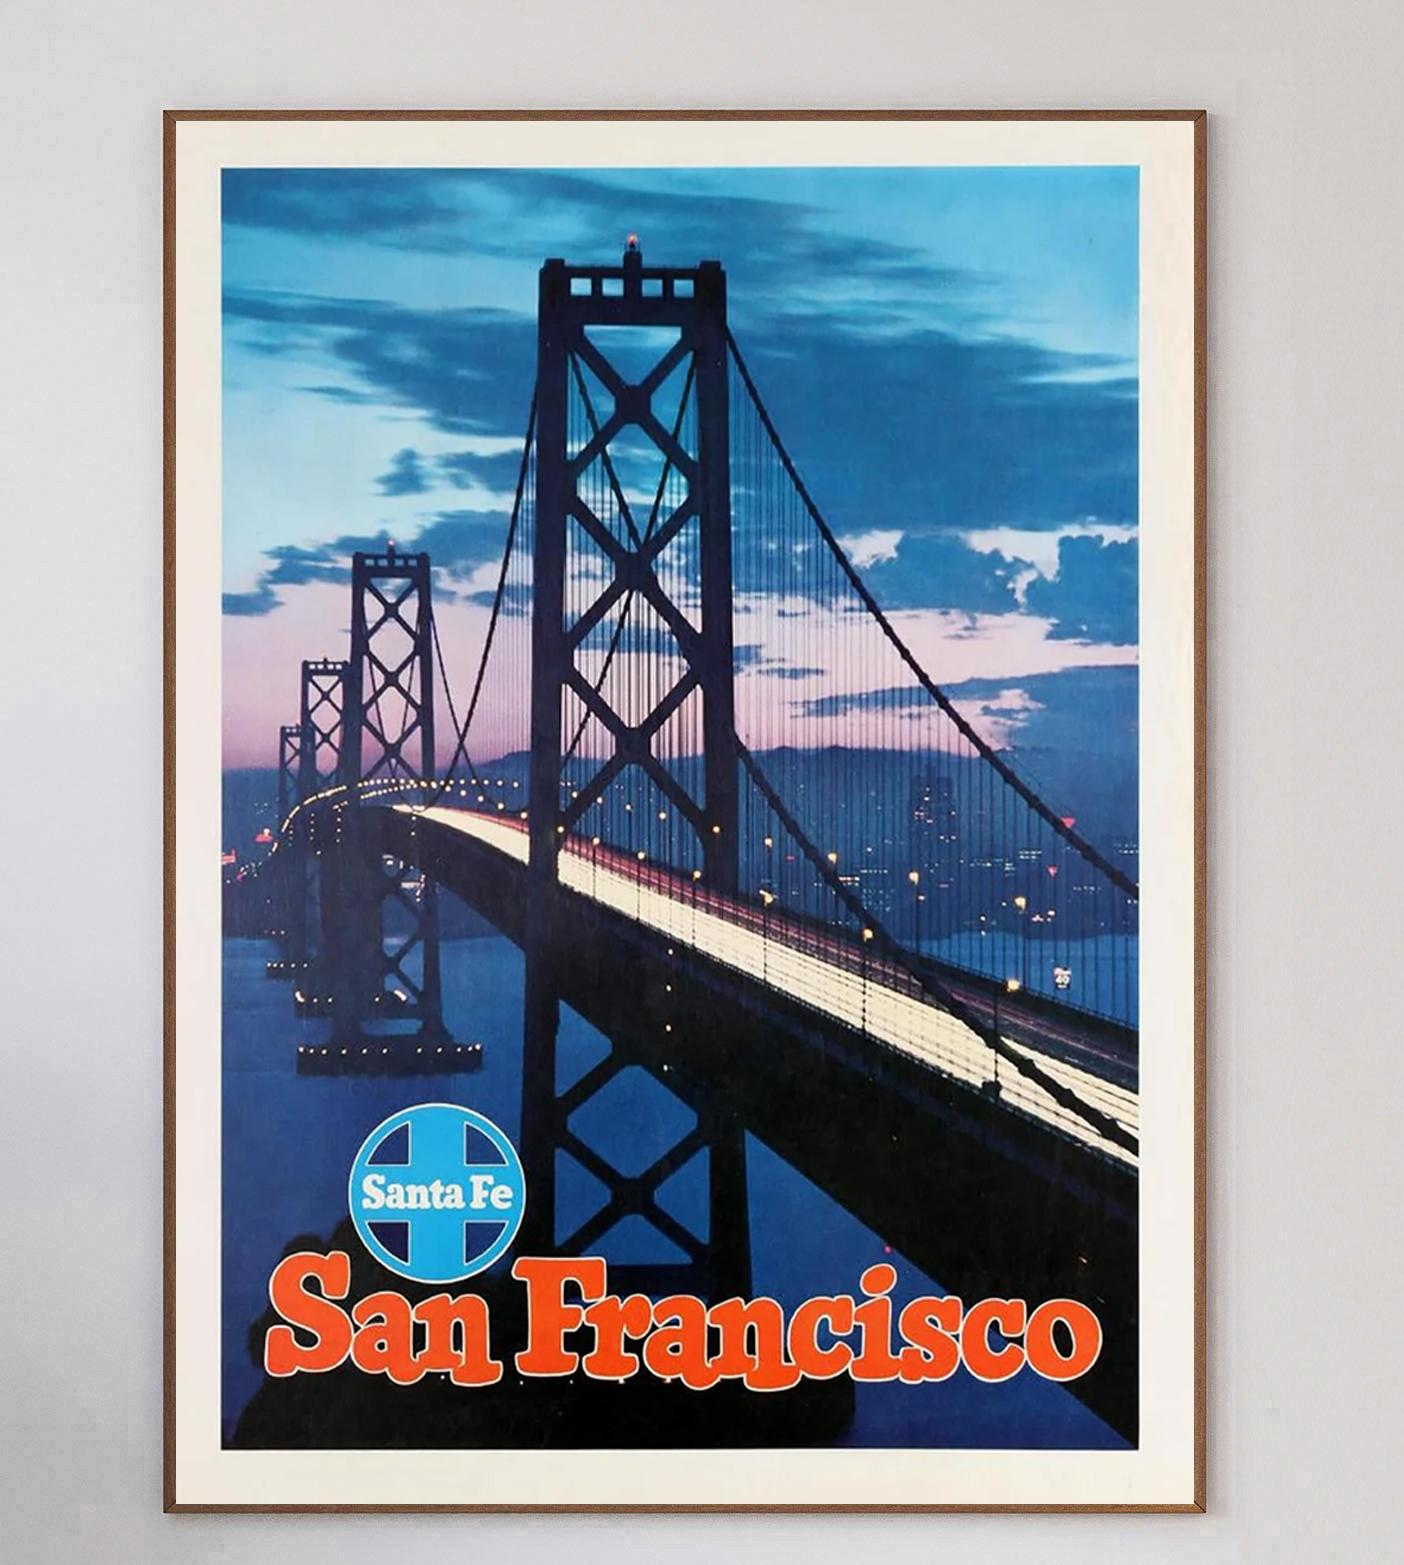 Stunning poster for the Santa Fe Railway promoting routes to San Francisco, California. Founded in 1859, the Santa Fe Railway, full name Atchison, Topeka and Santa Fe Railway operated for almost 140 years serving the Mid-West United States.

With